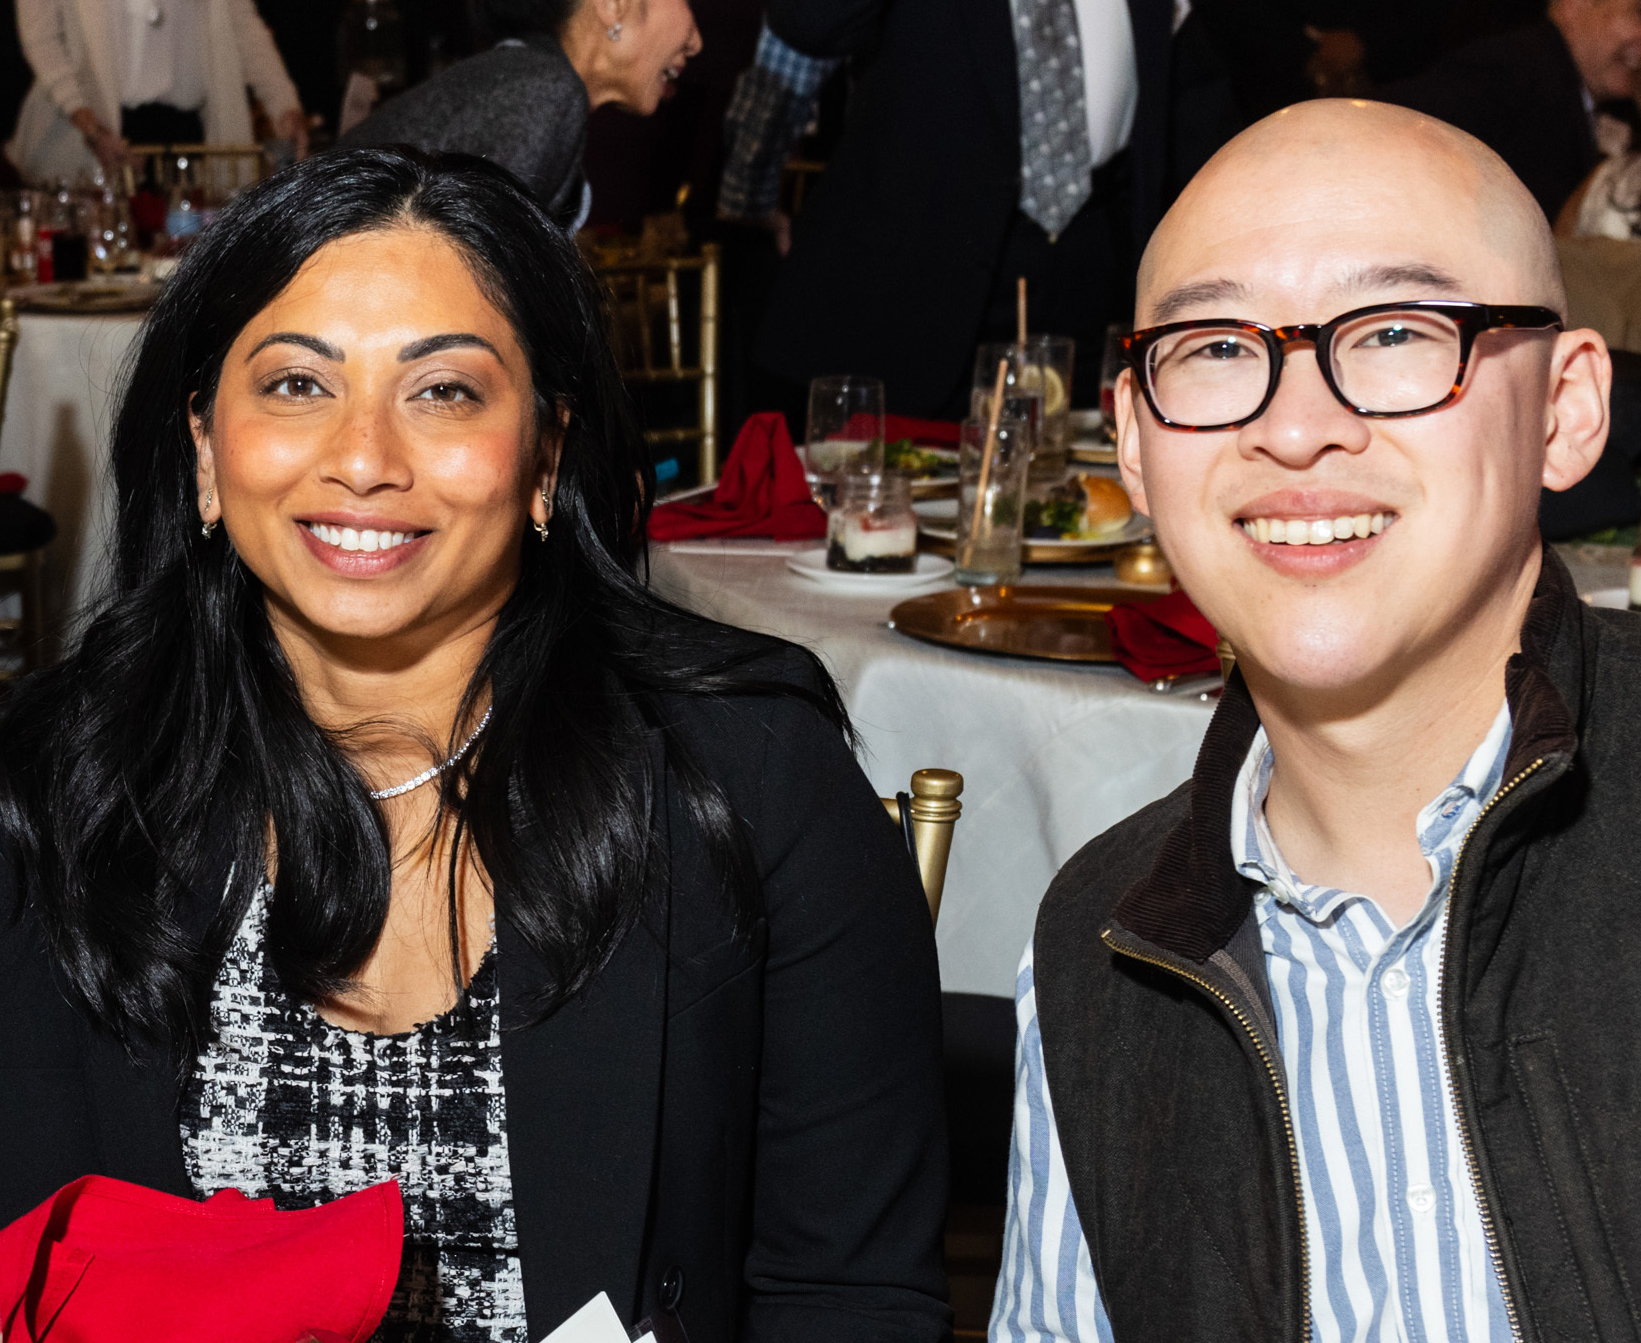 Kanishka Cheng and Jay Cheng smile a table at a social event. She has long hair and he wears glasses.